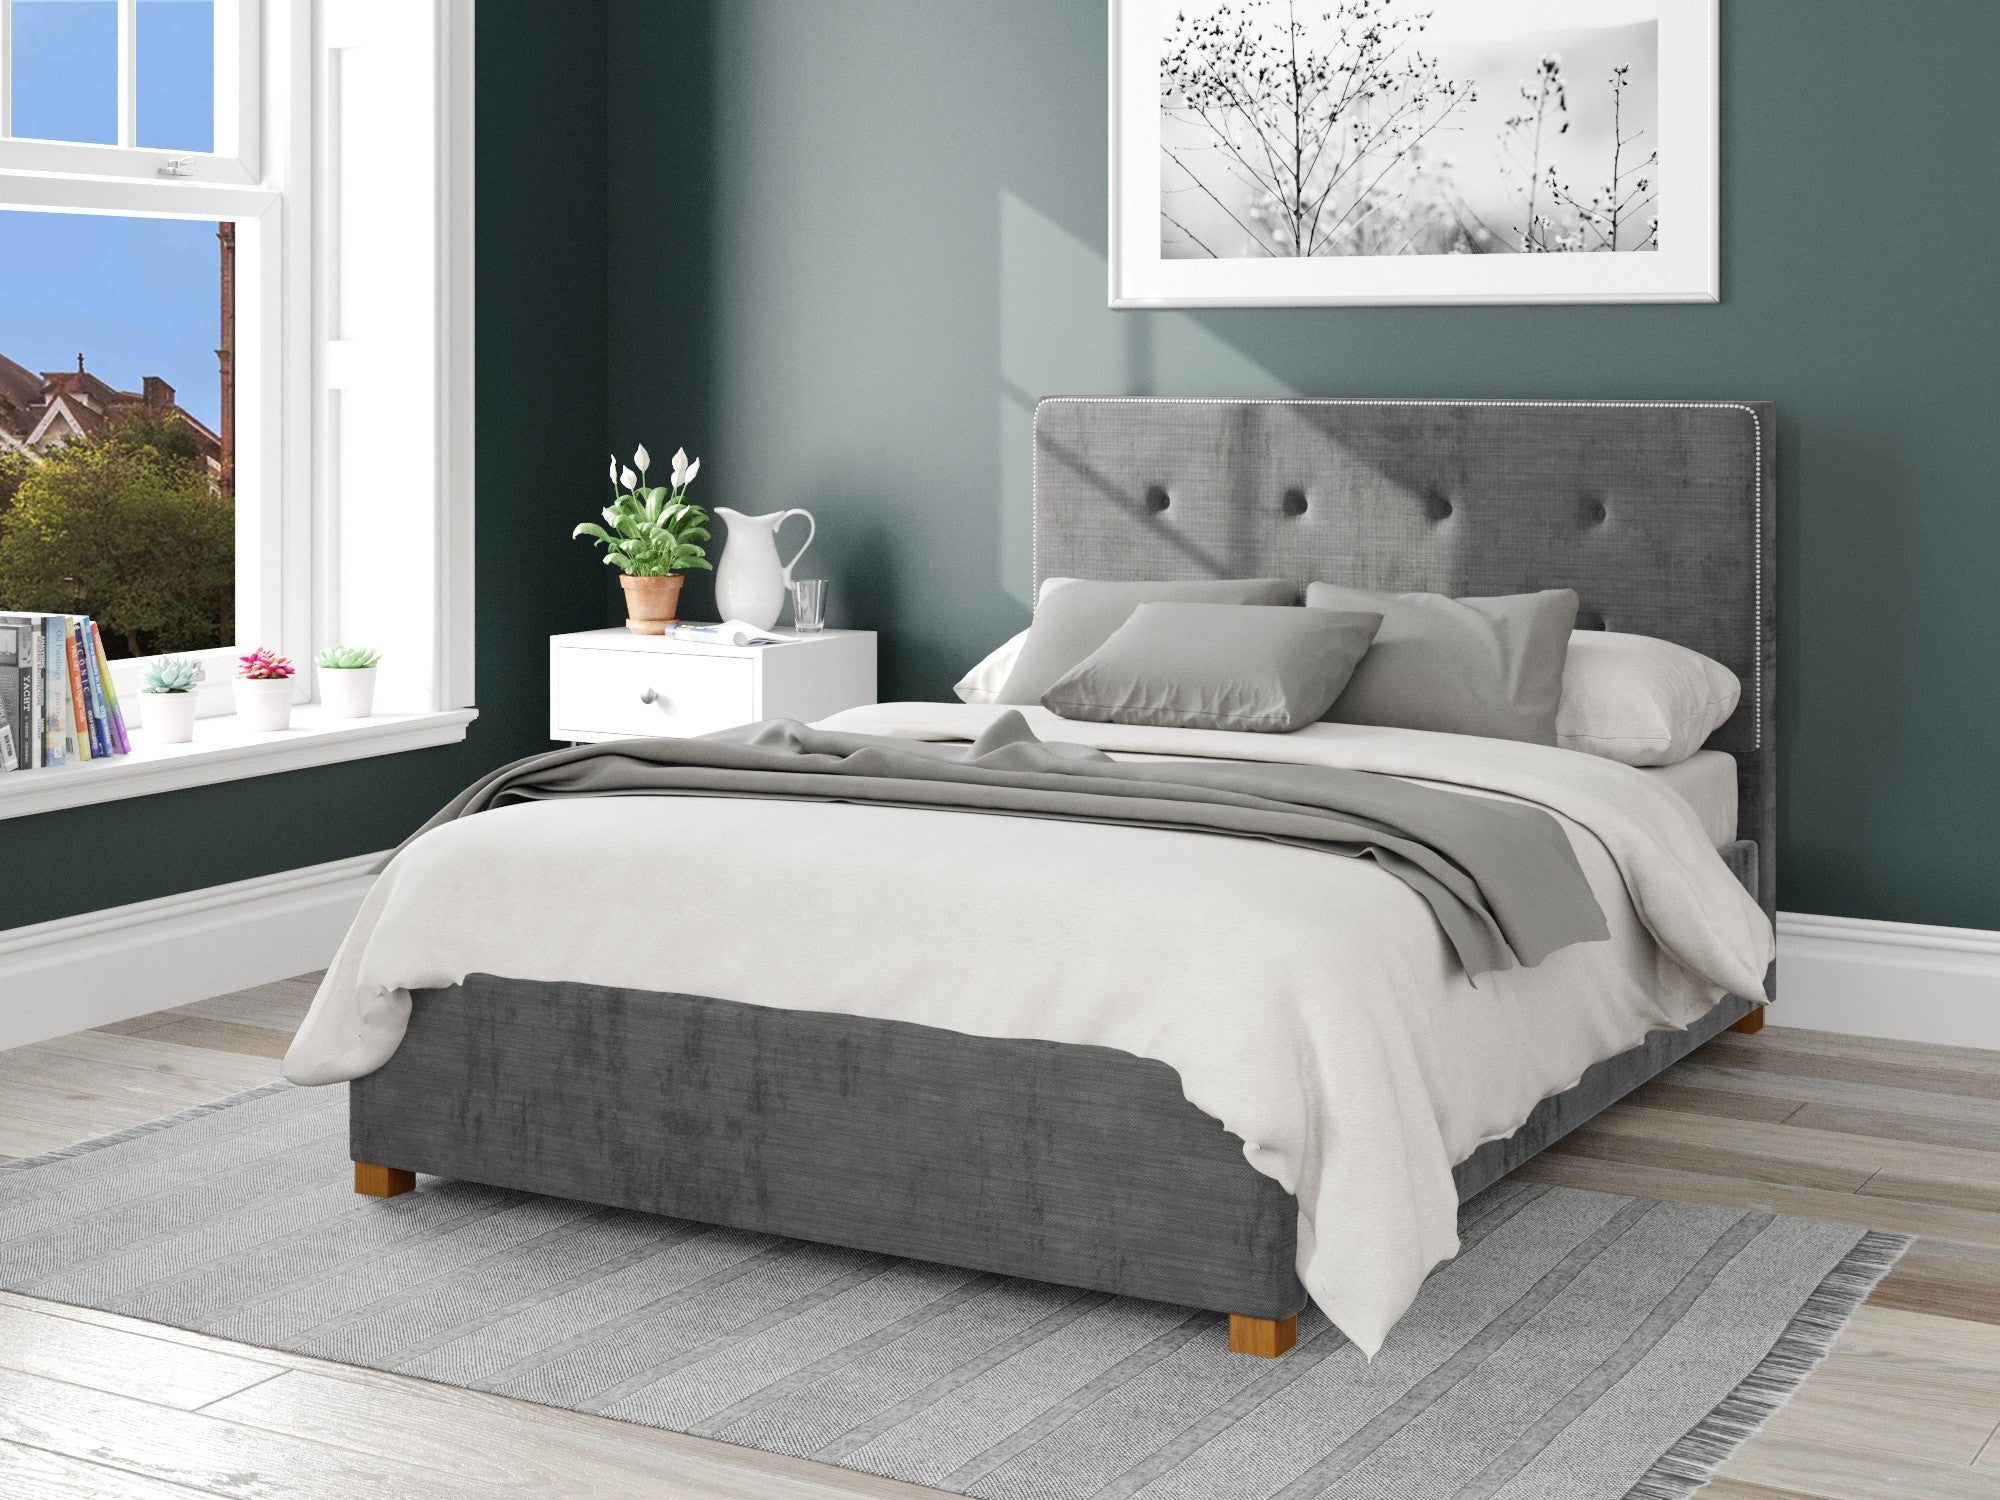 Presley Fabric Ottoman Bed - Firenza Velour - Charcoal